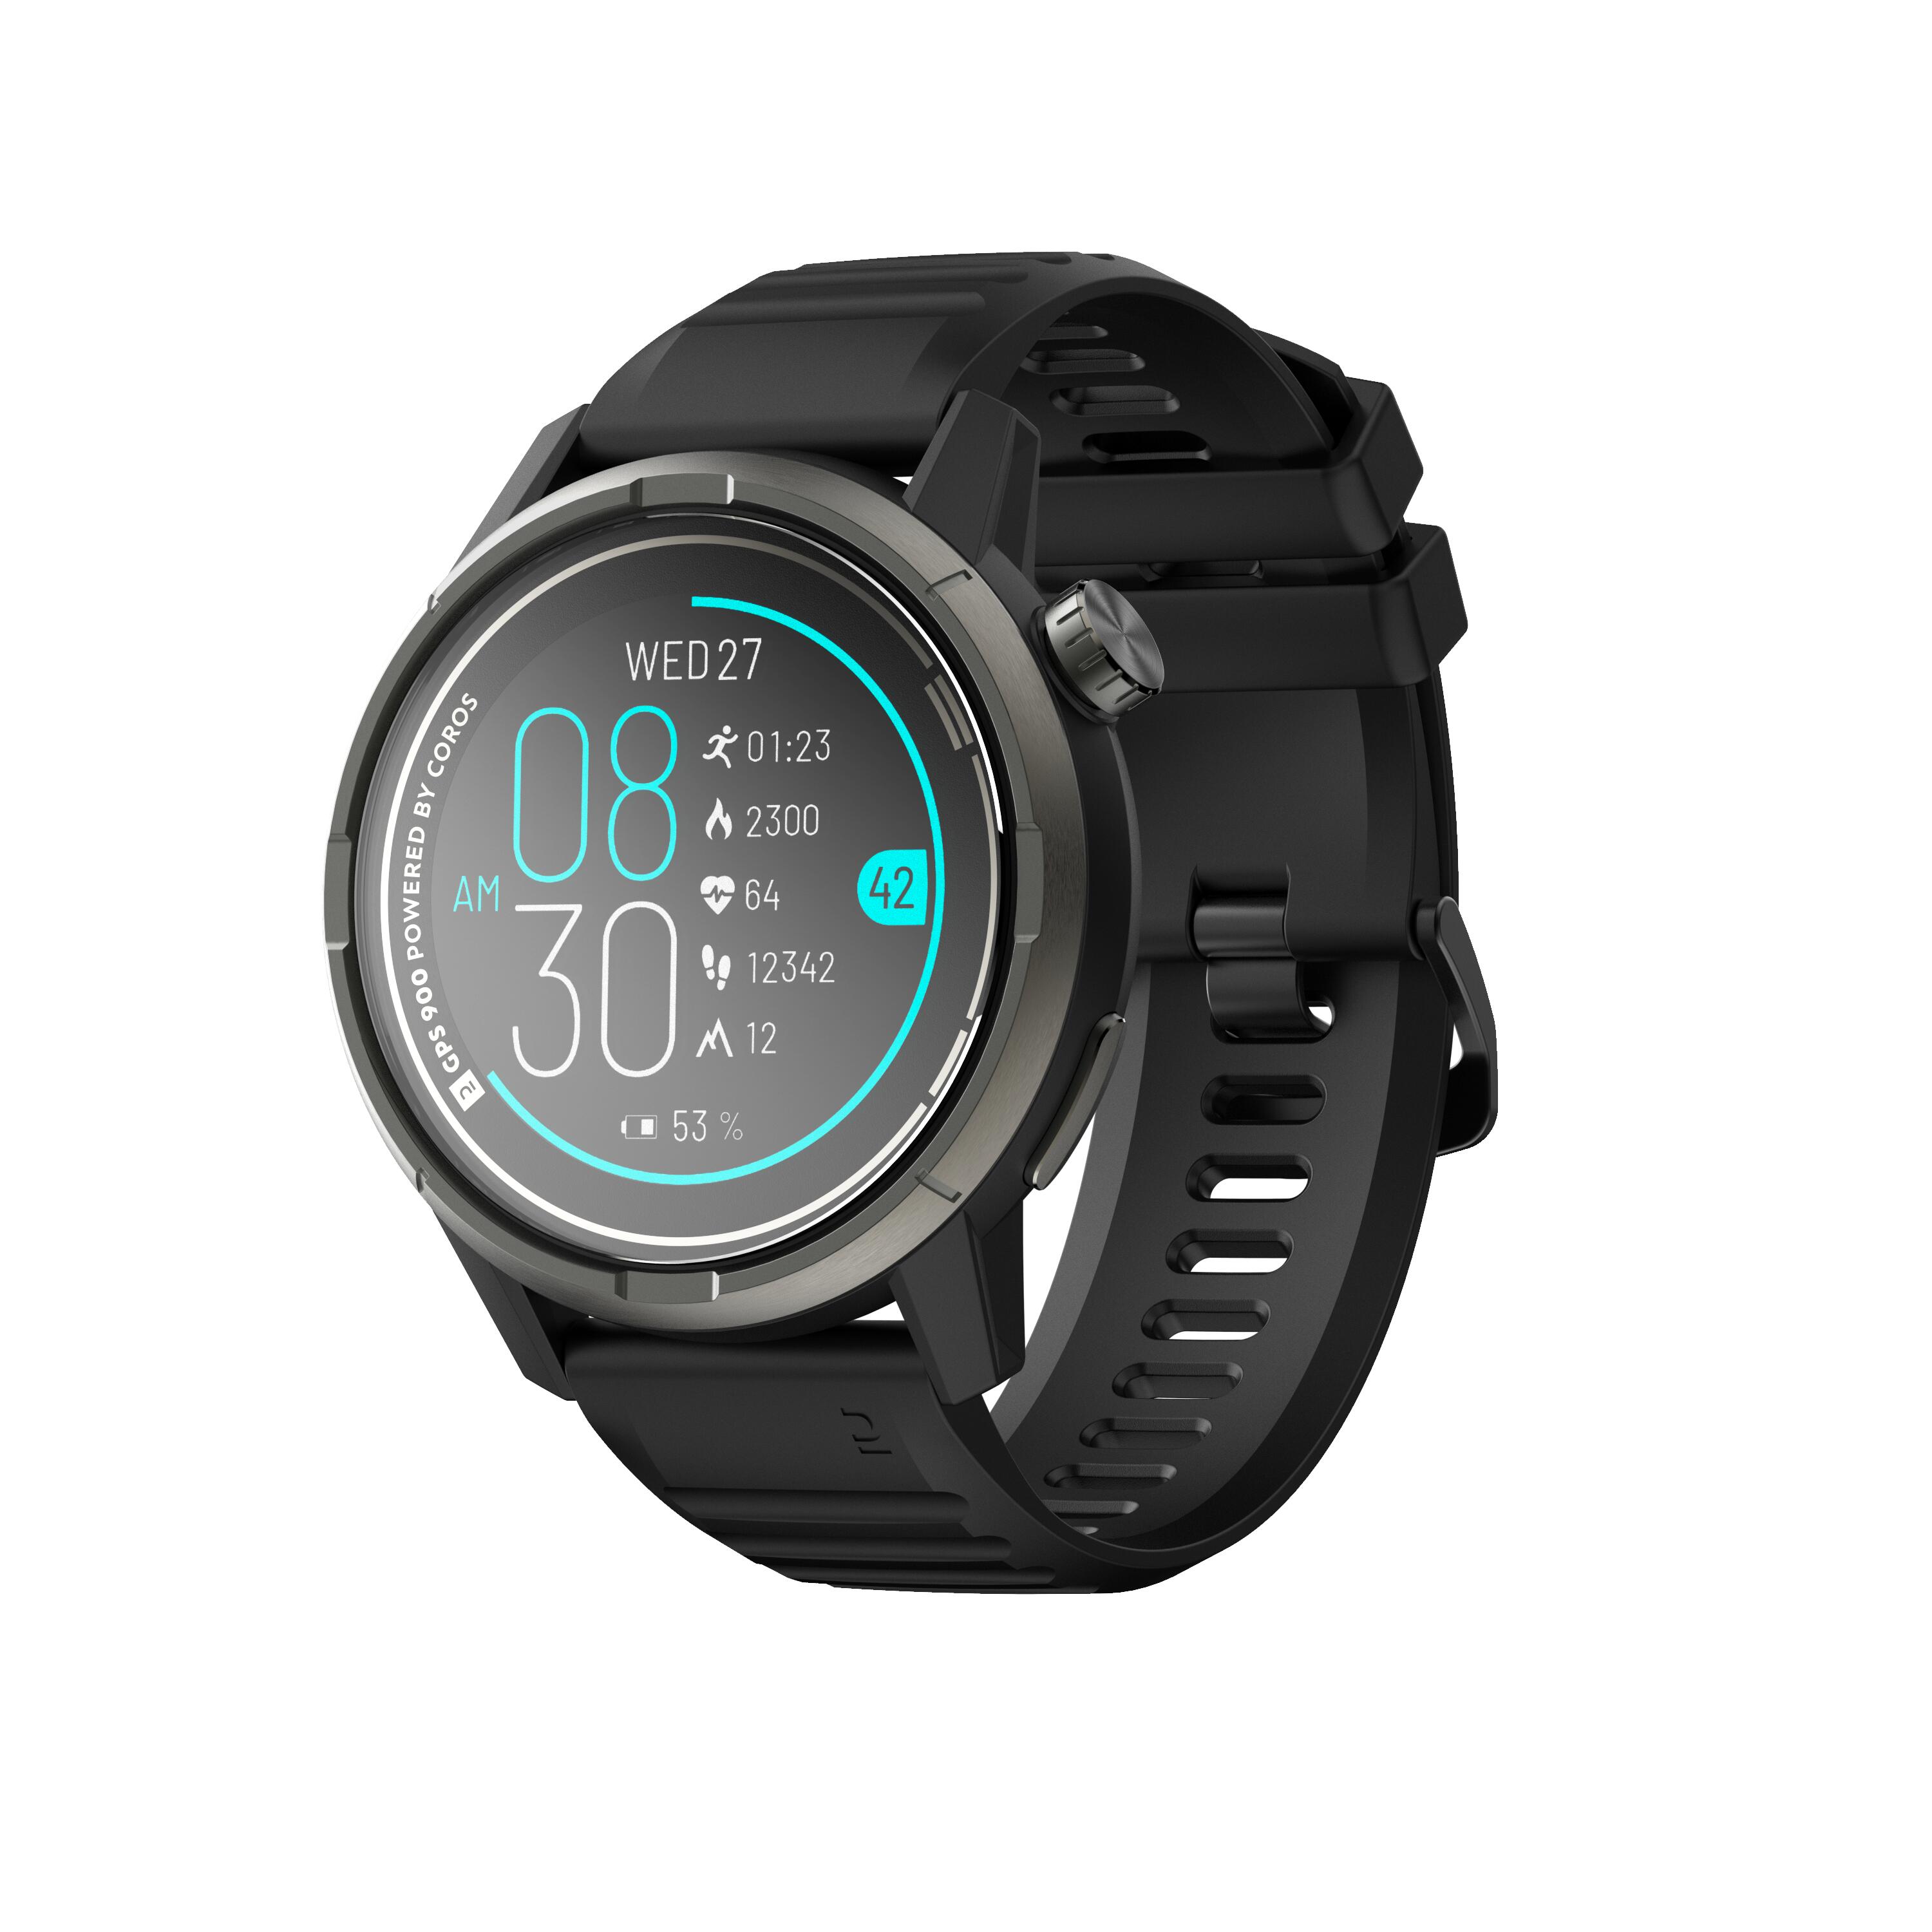 Outdoor Watches and Walking GPS